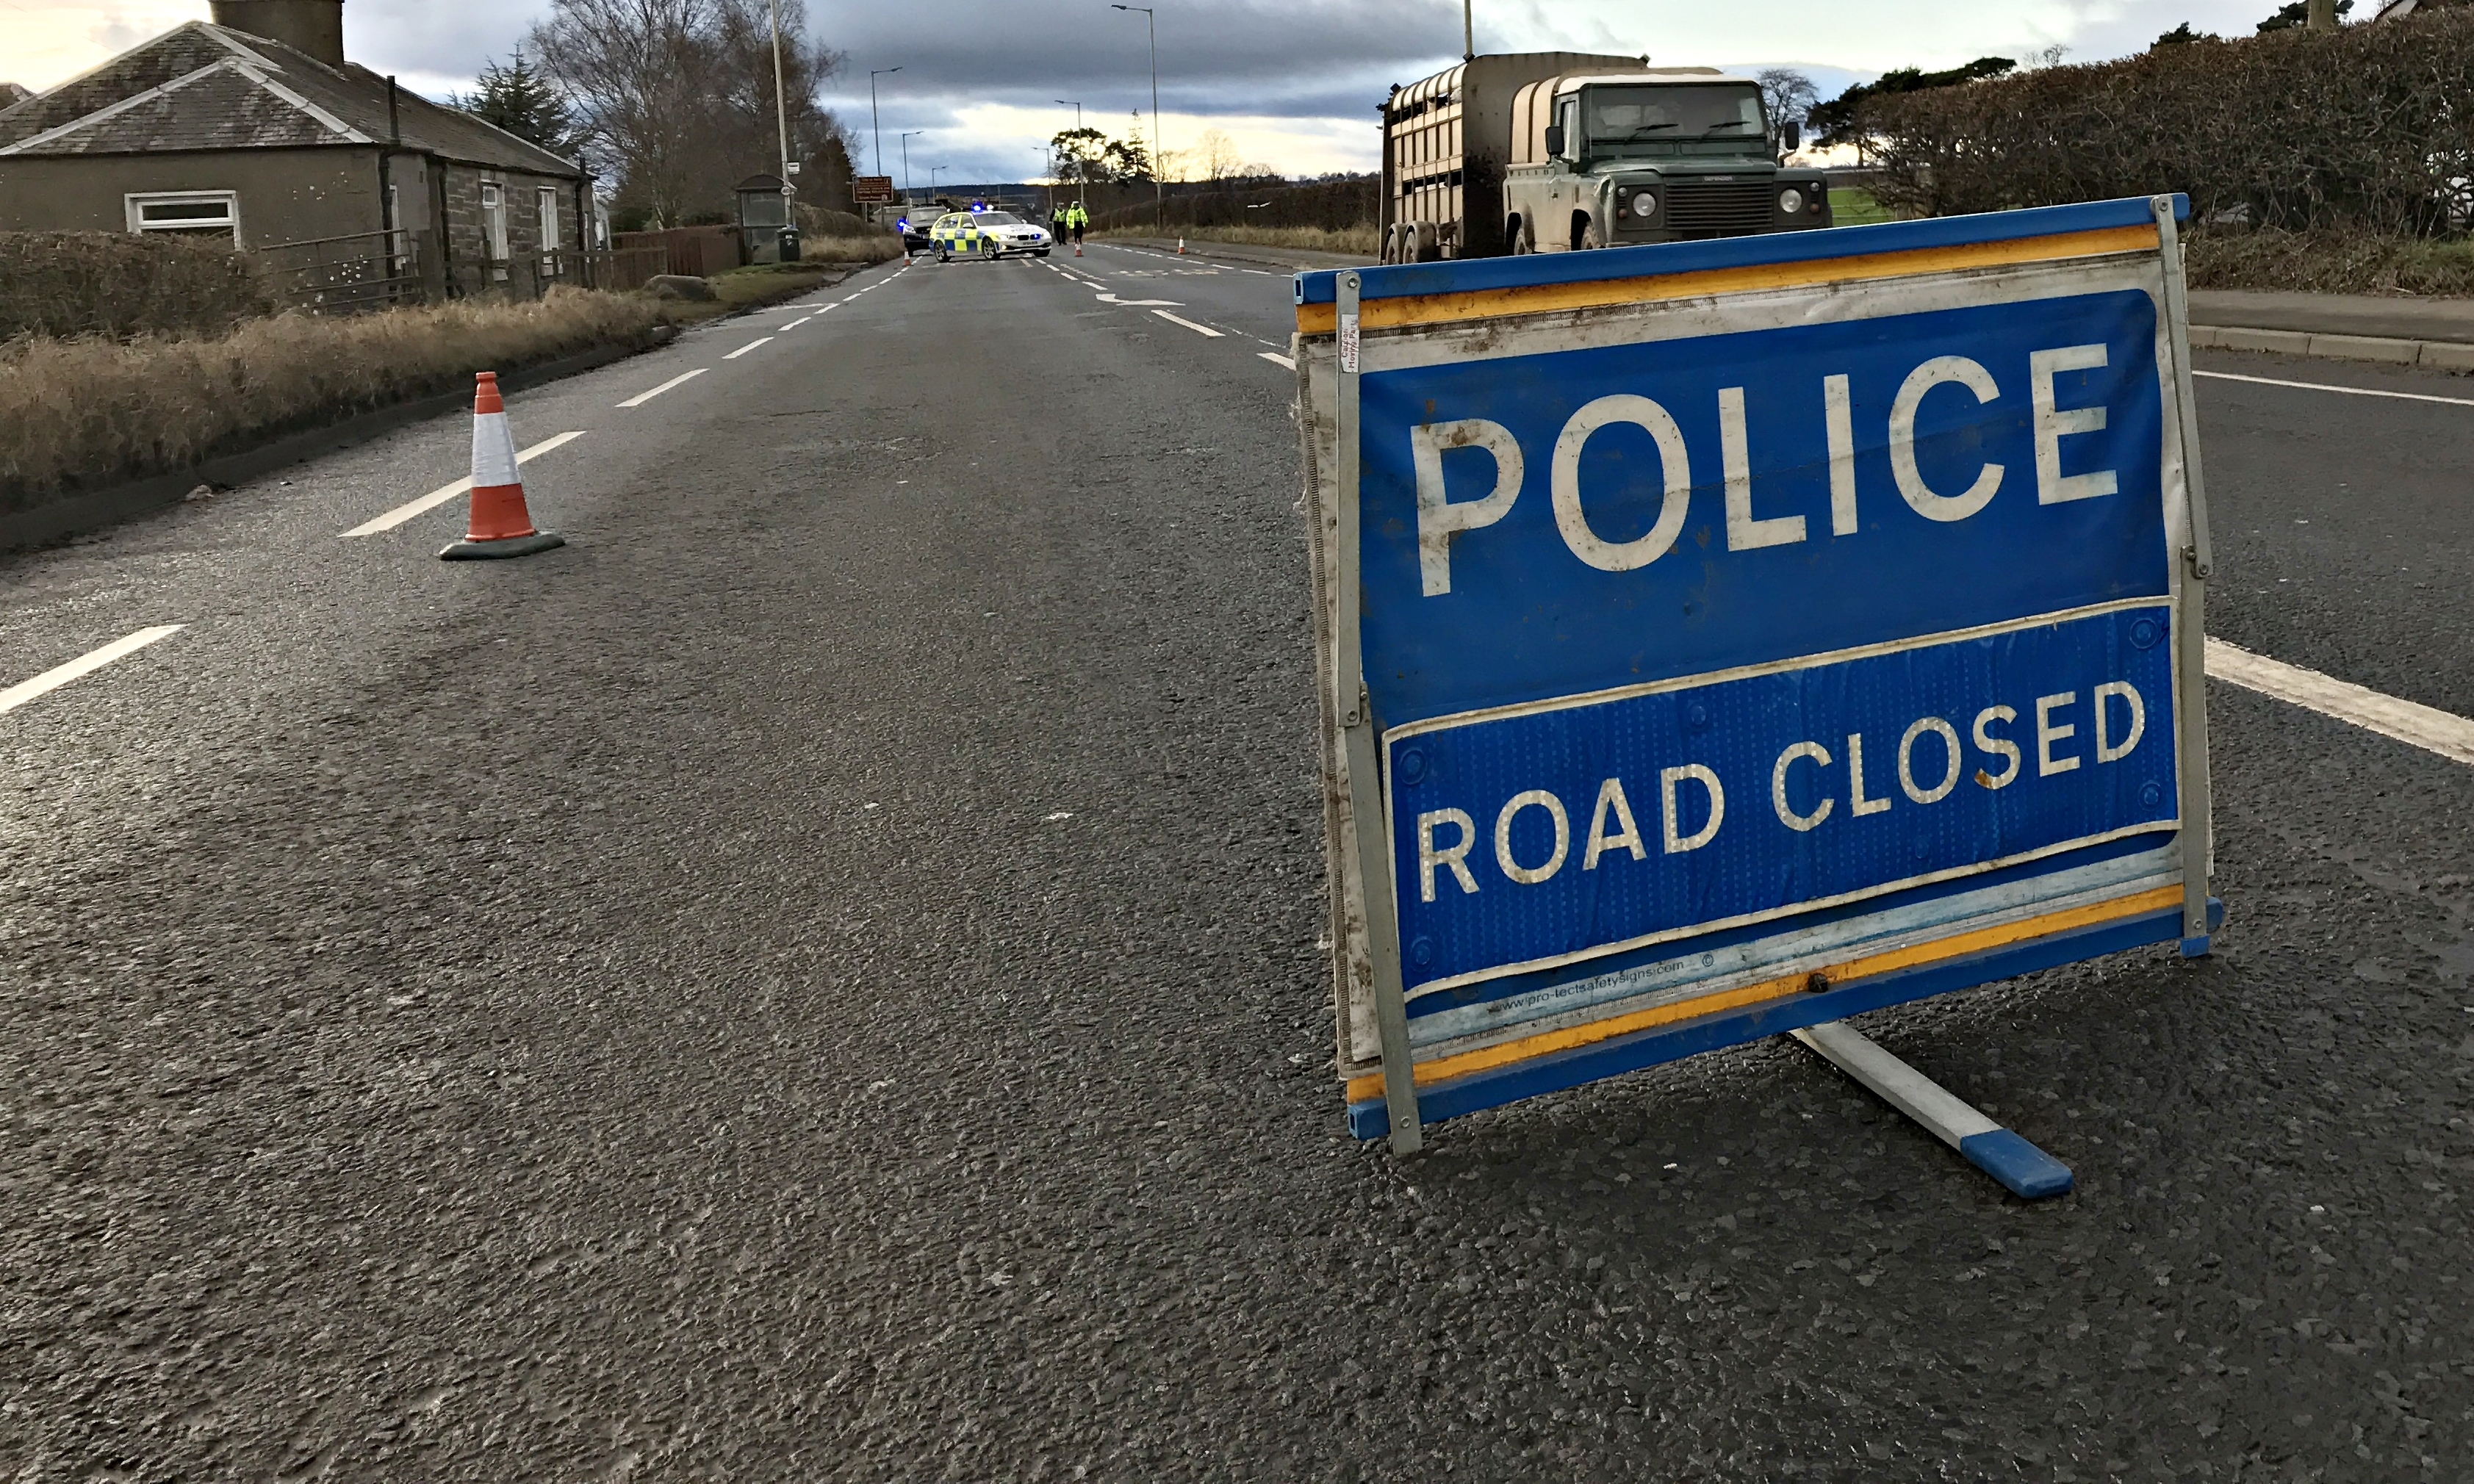 The A94 closed by police after the accident.